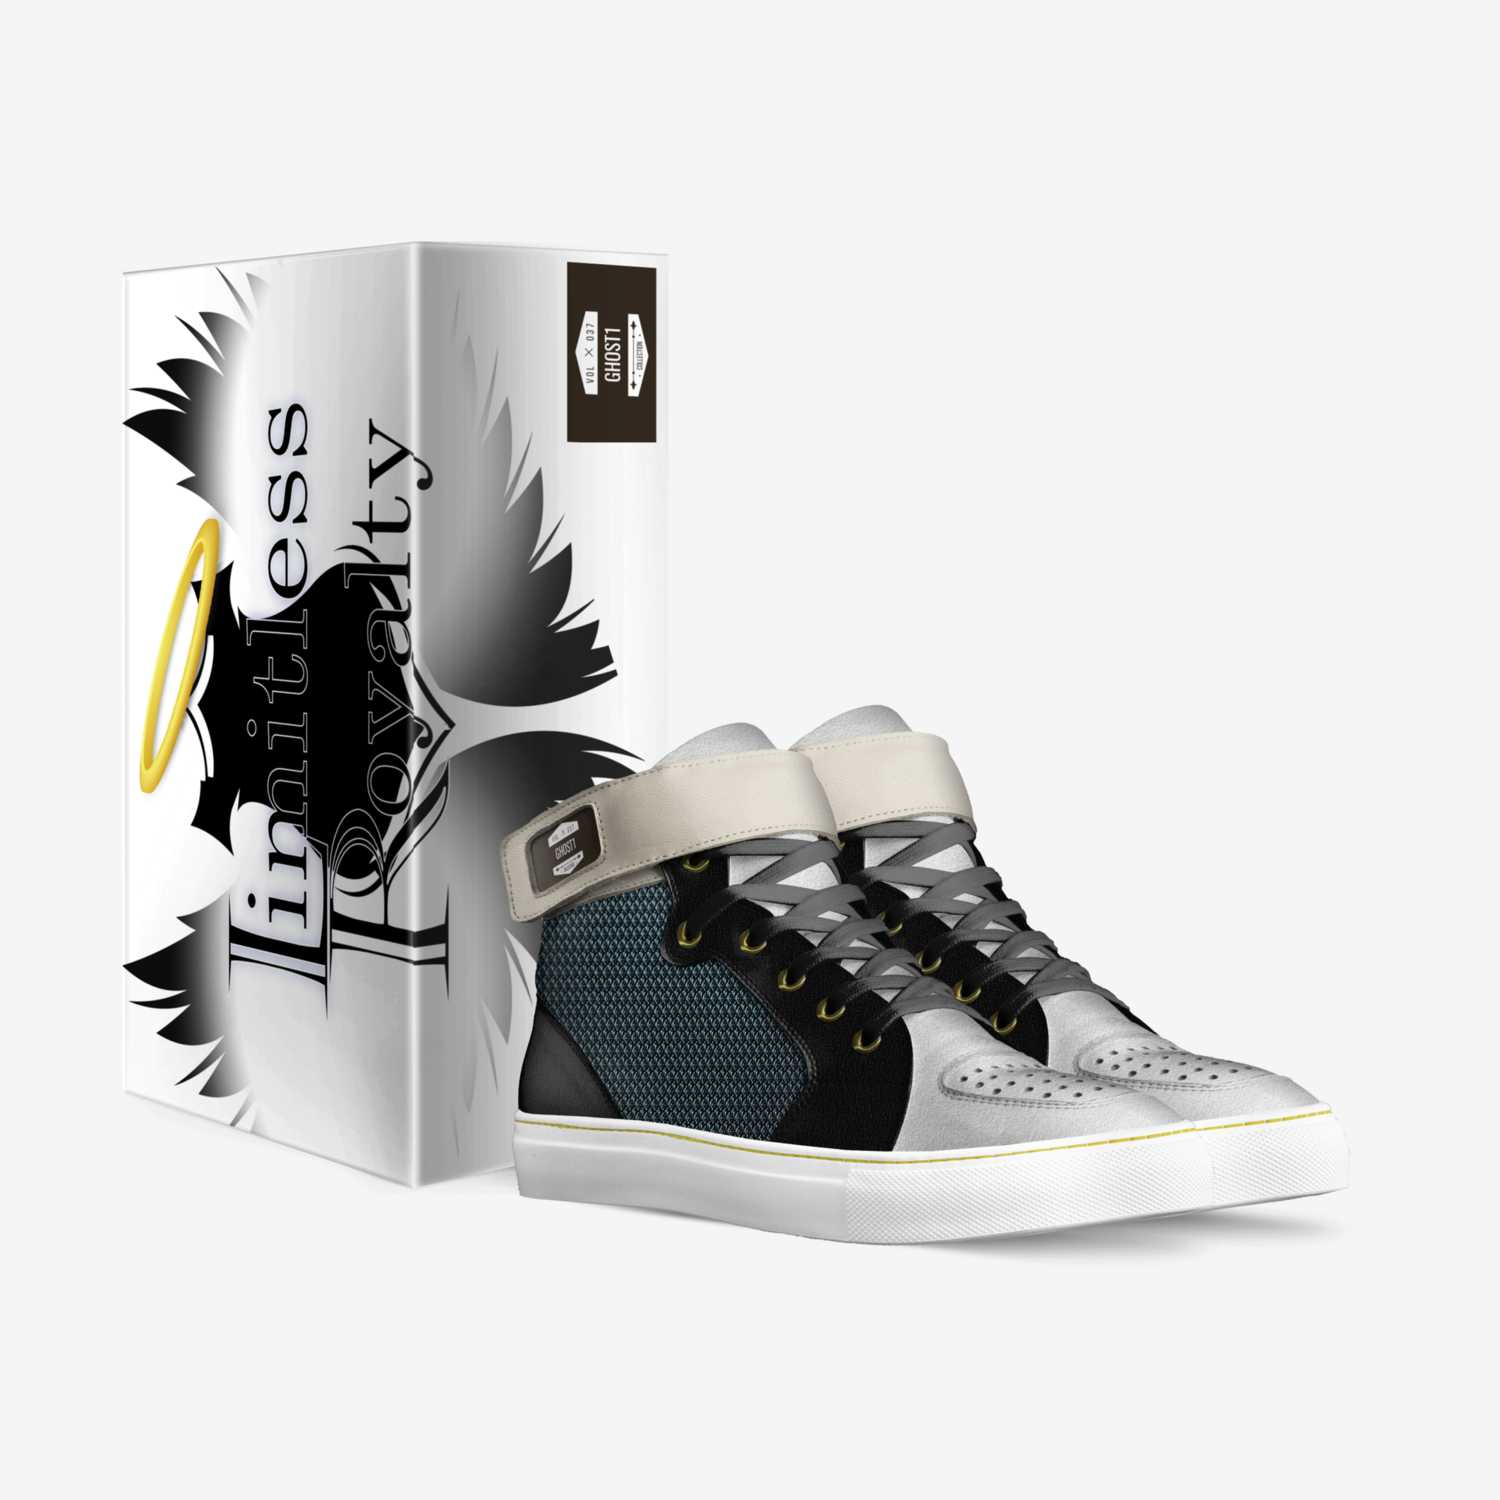 Ghost1 custom made in Italy shoes by Limitlessroyalty Brand | Box view